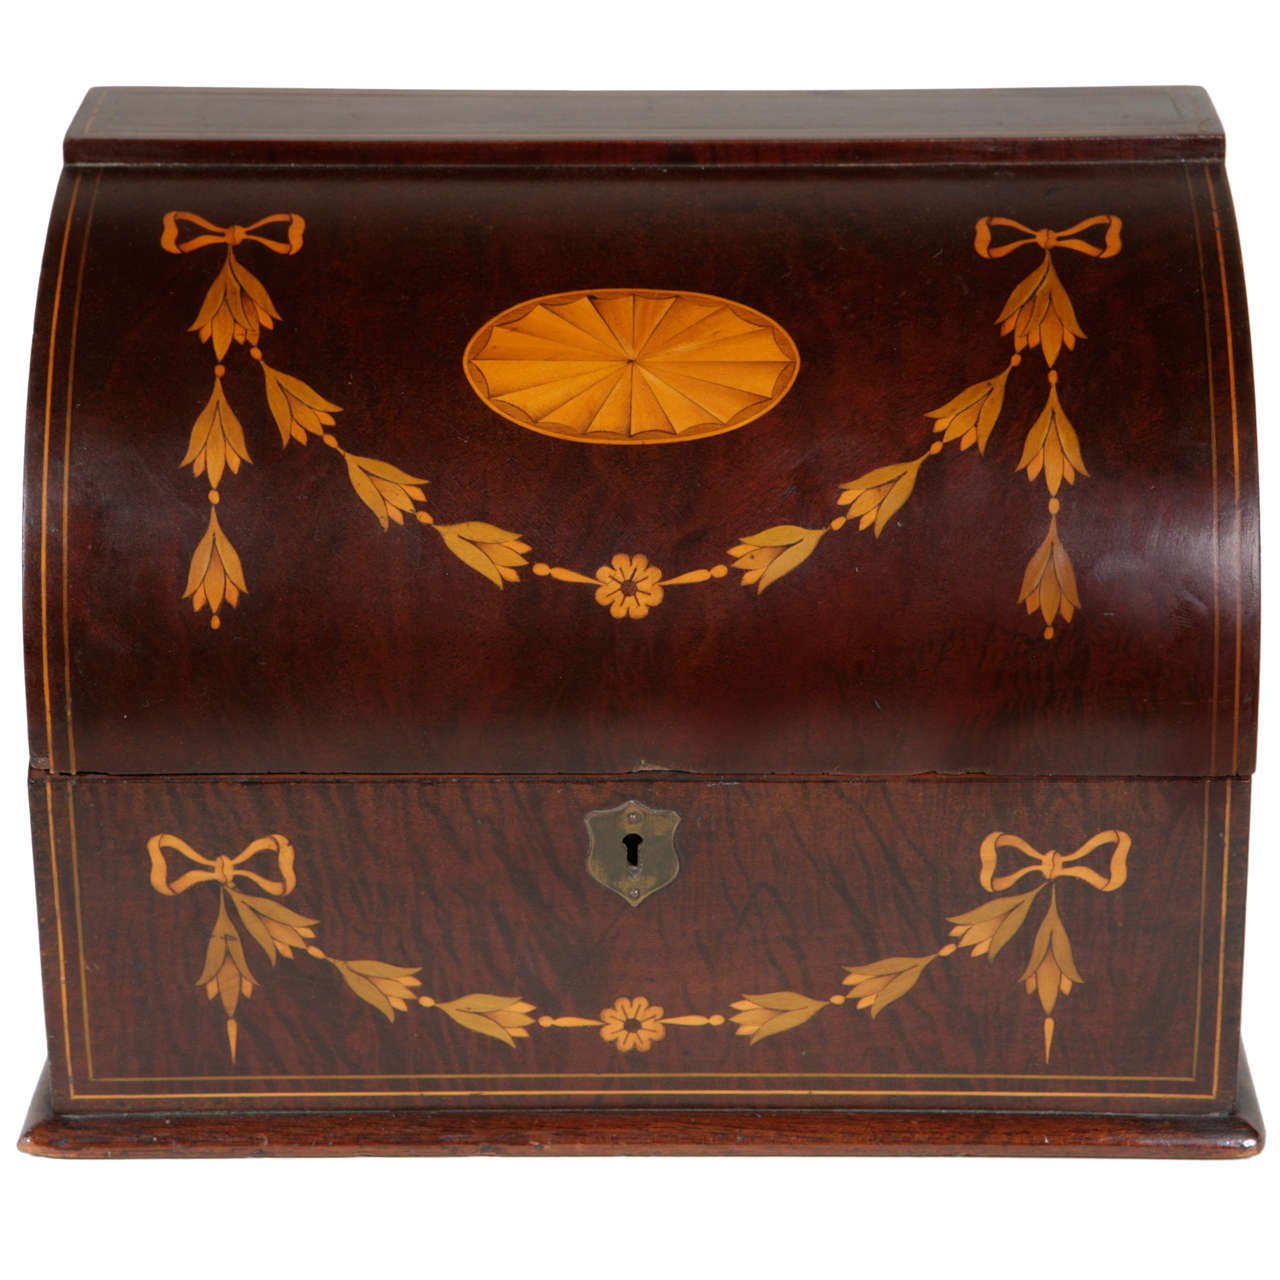 19th Century English Inlaid Letter Box Signed by Maker